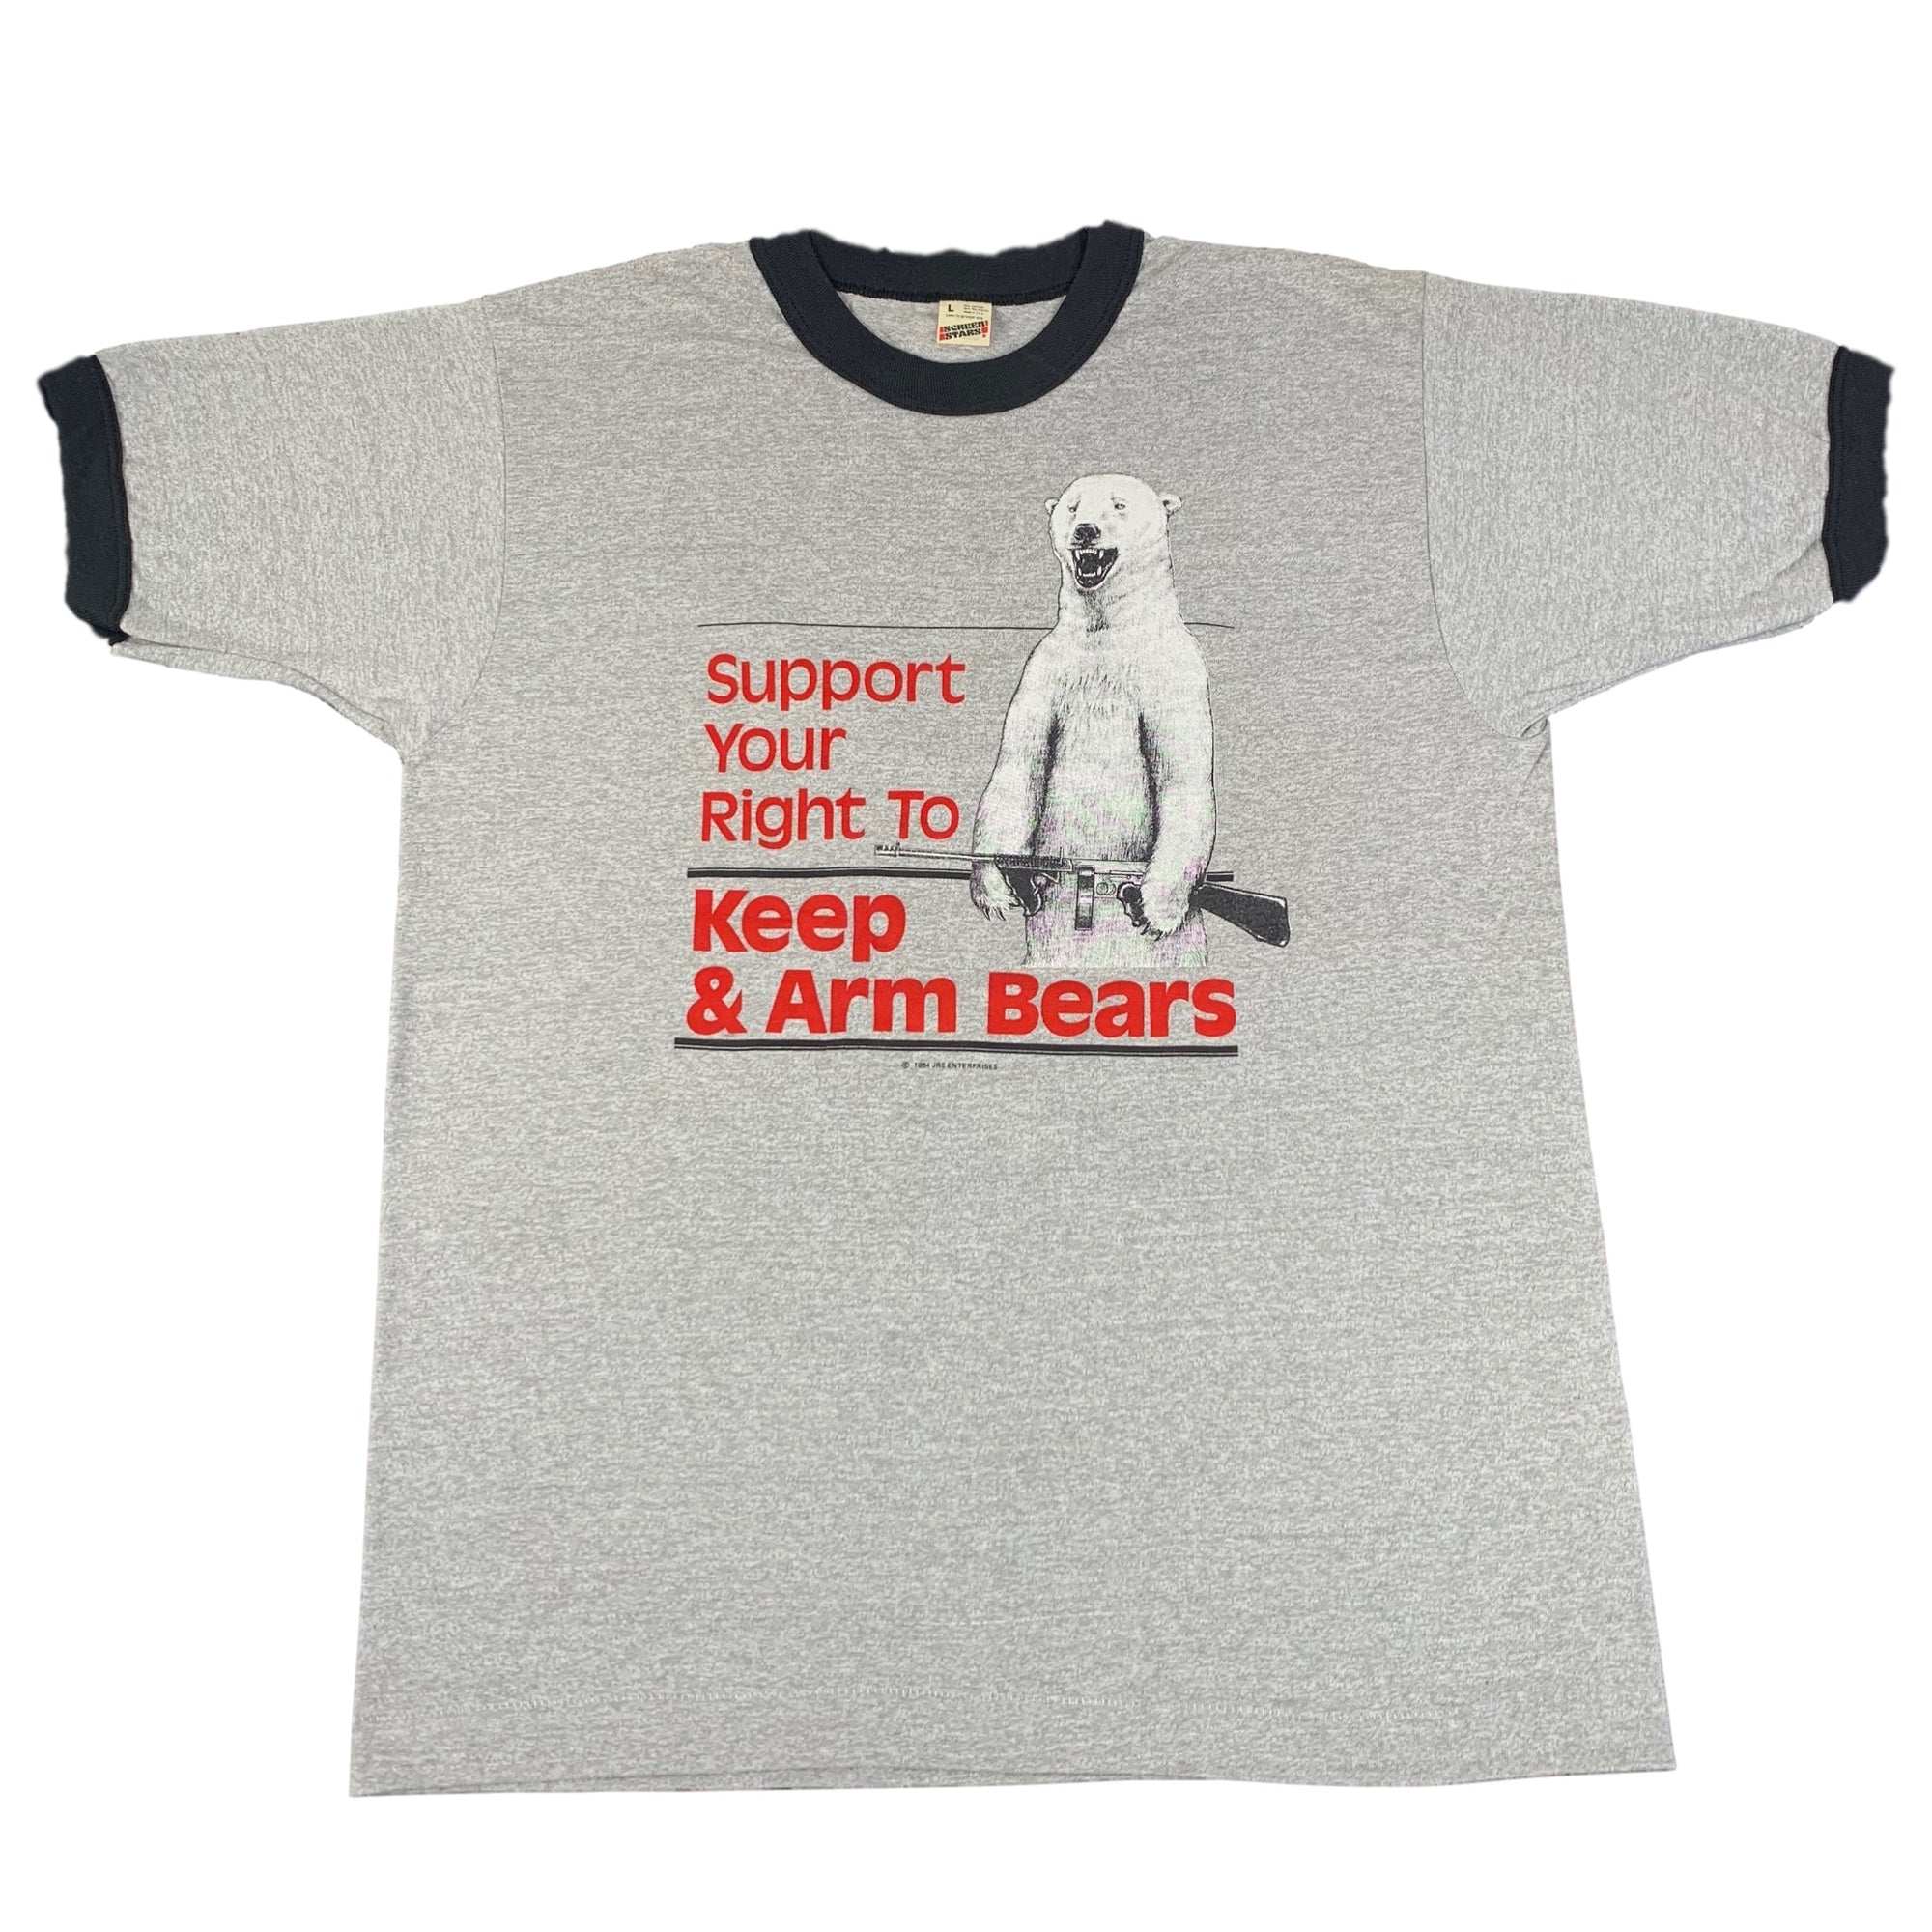 Vintage Keep & Arm Bears "Support Your Right" Ringer T-Shirt - jointcustodydc